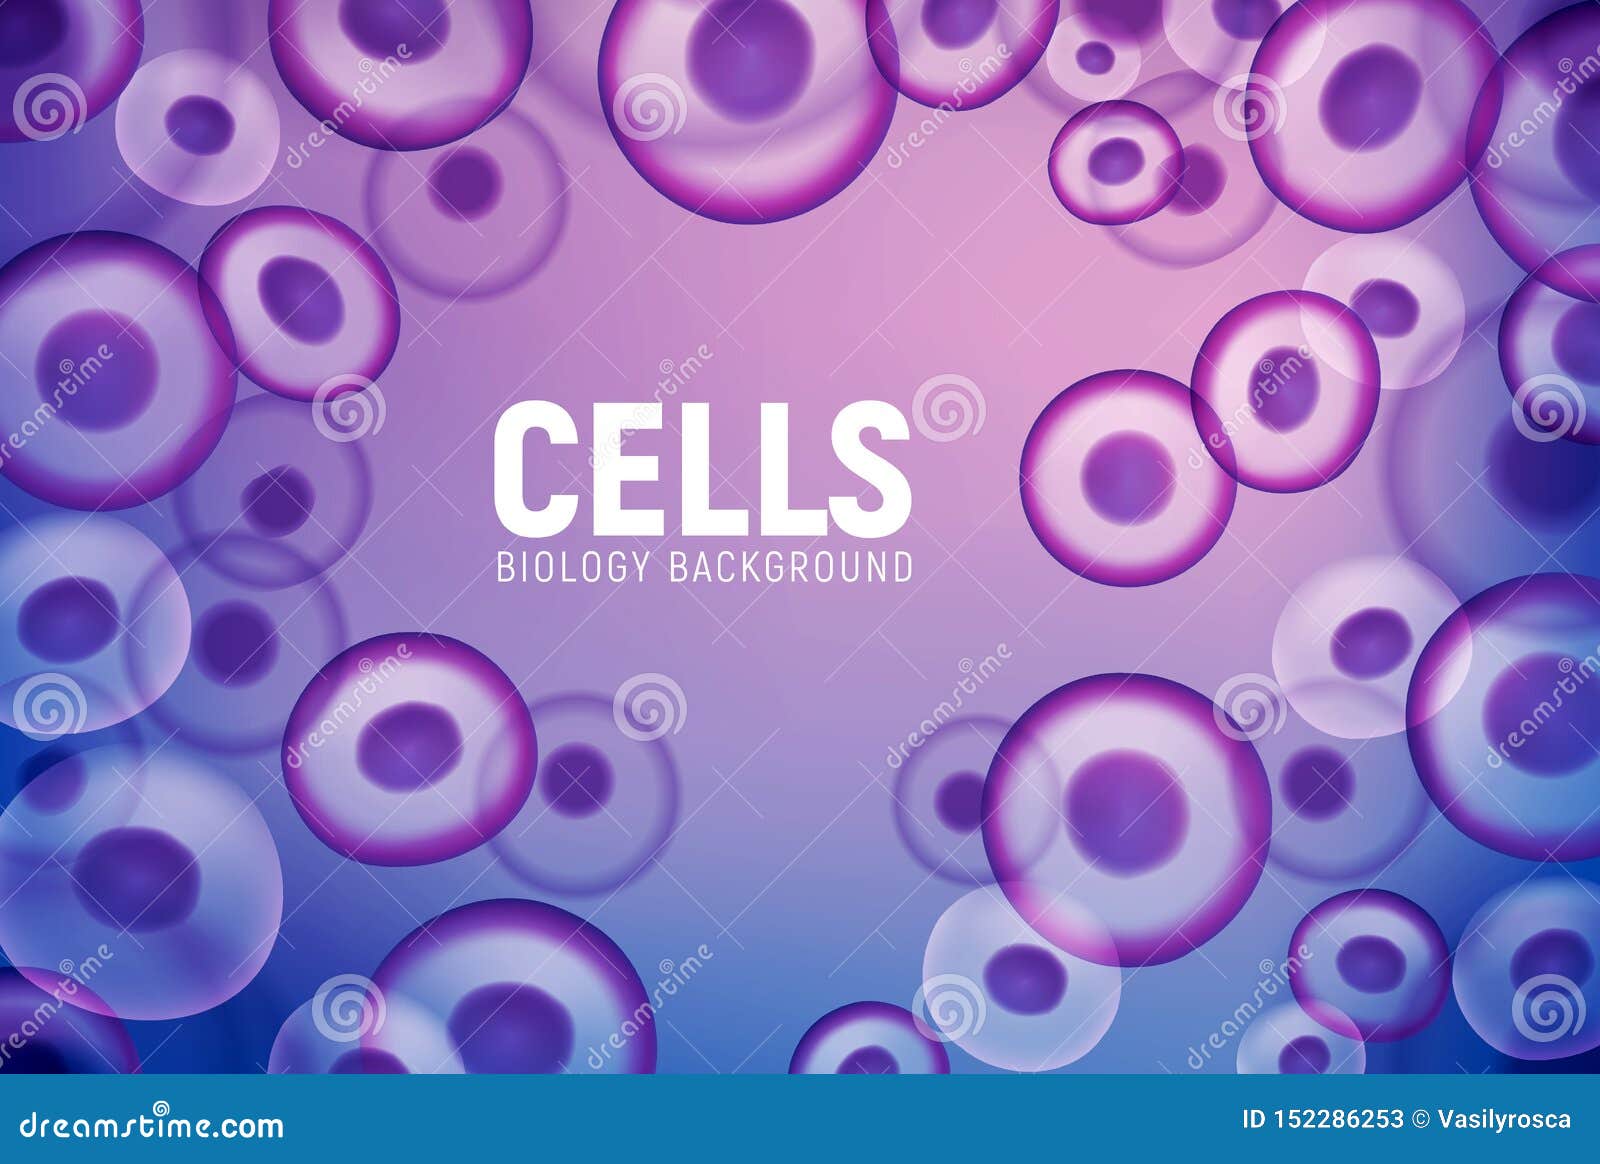 science cell wallpaper